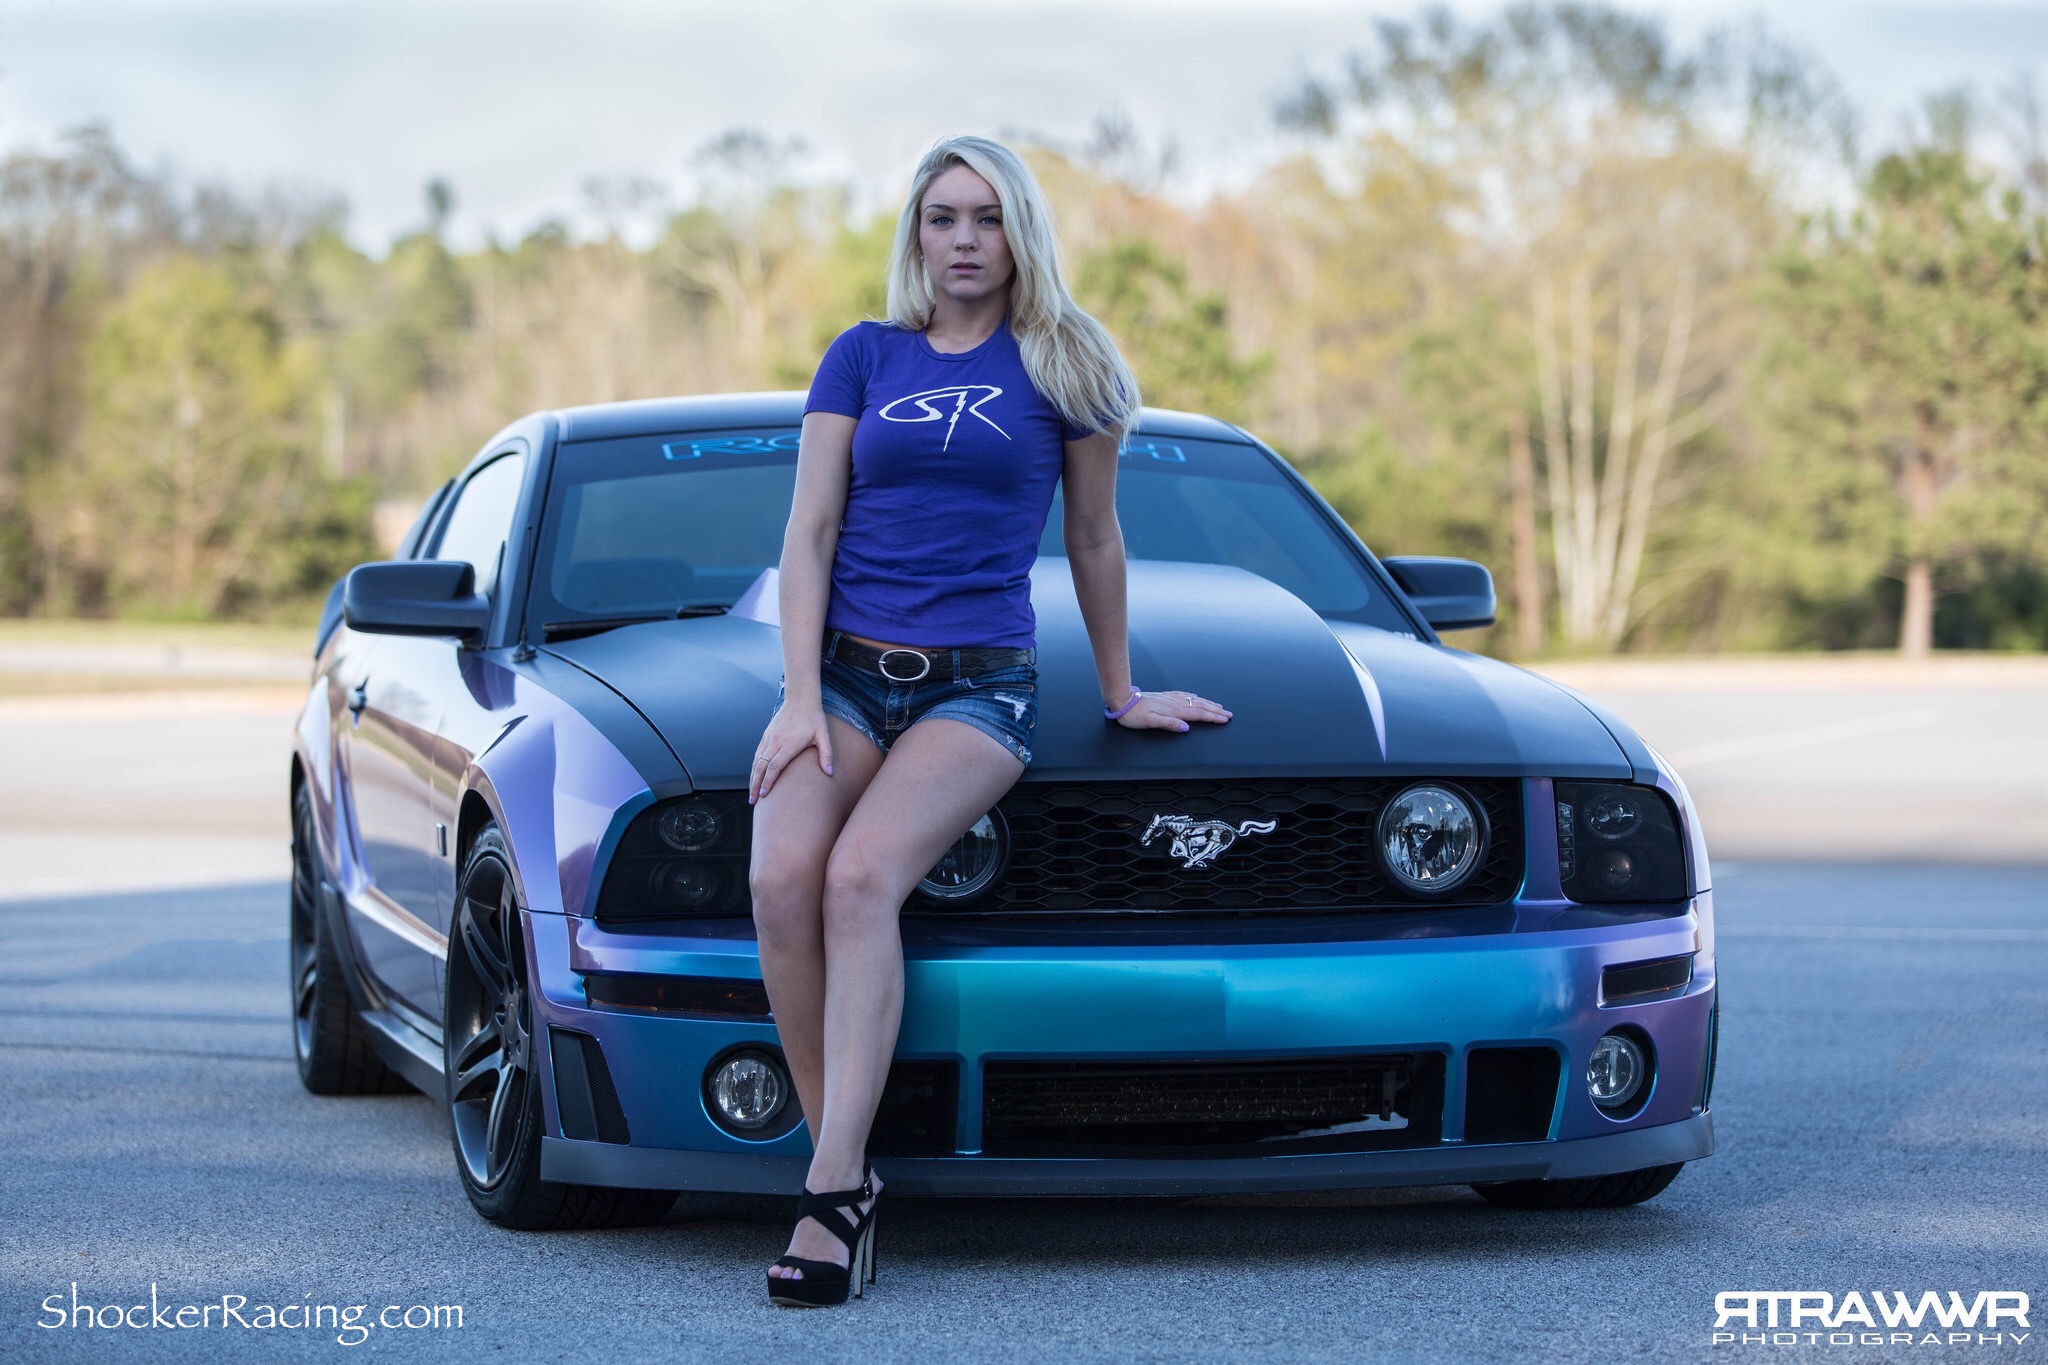 Megan Lyda with her Mustang